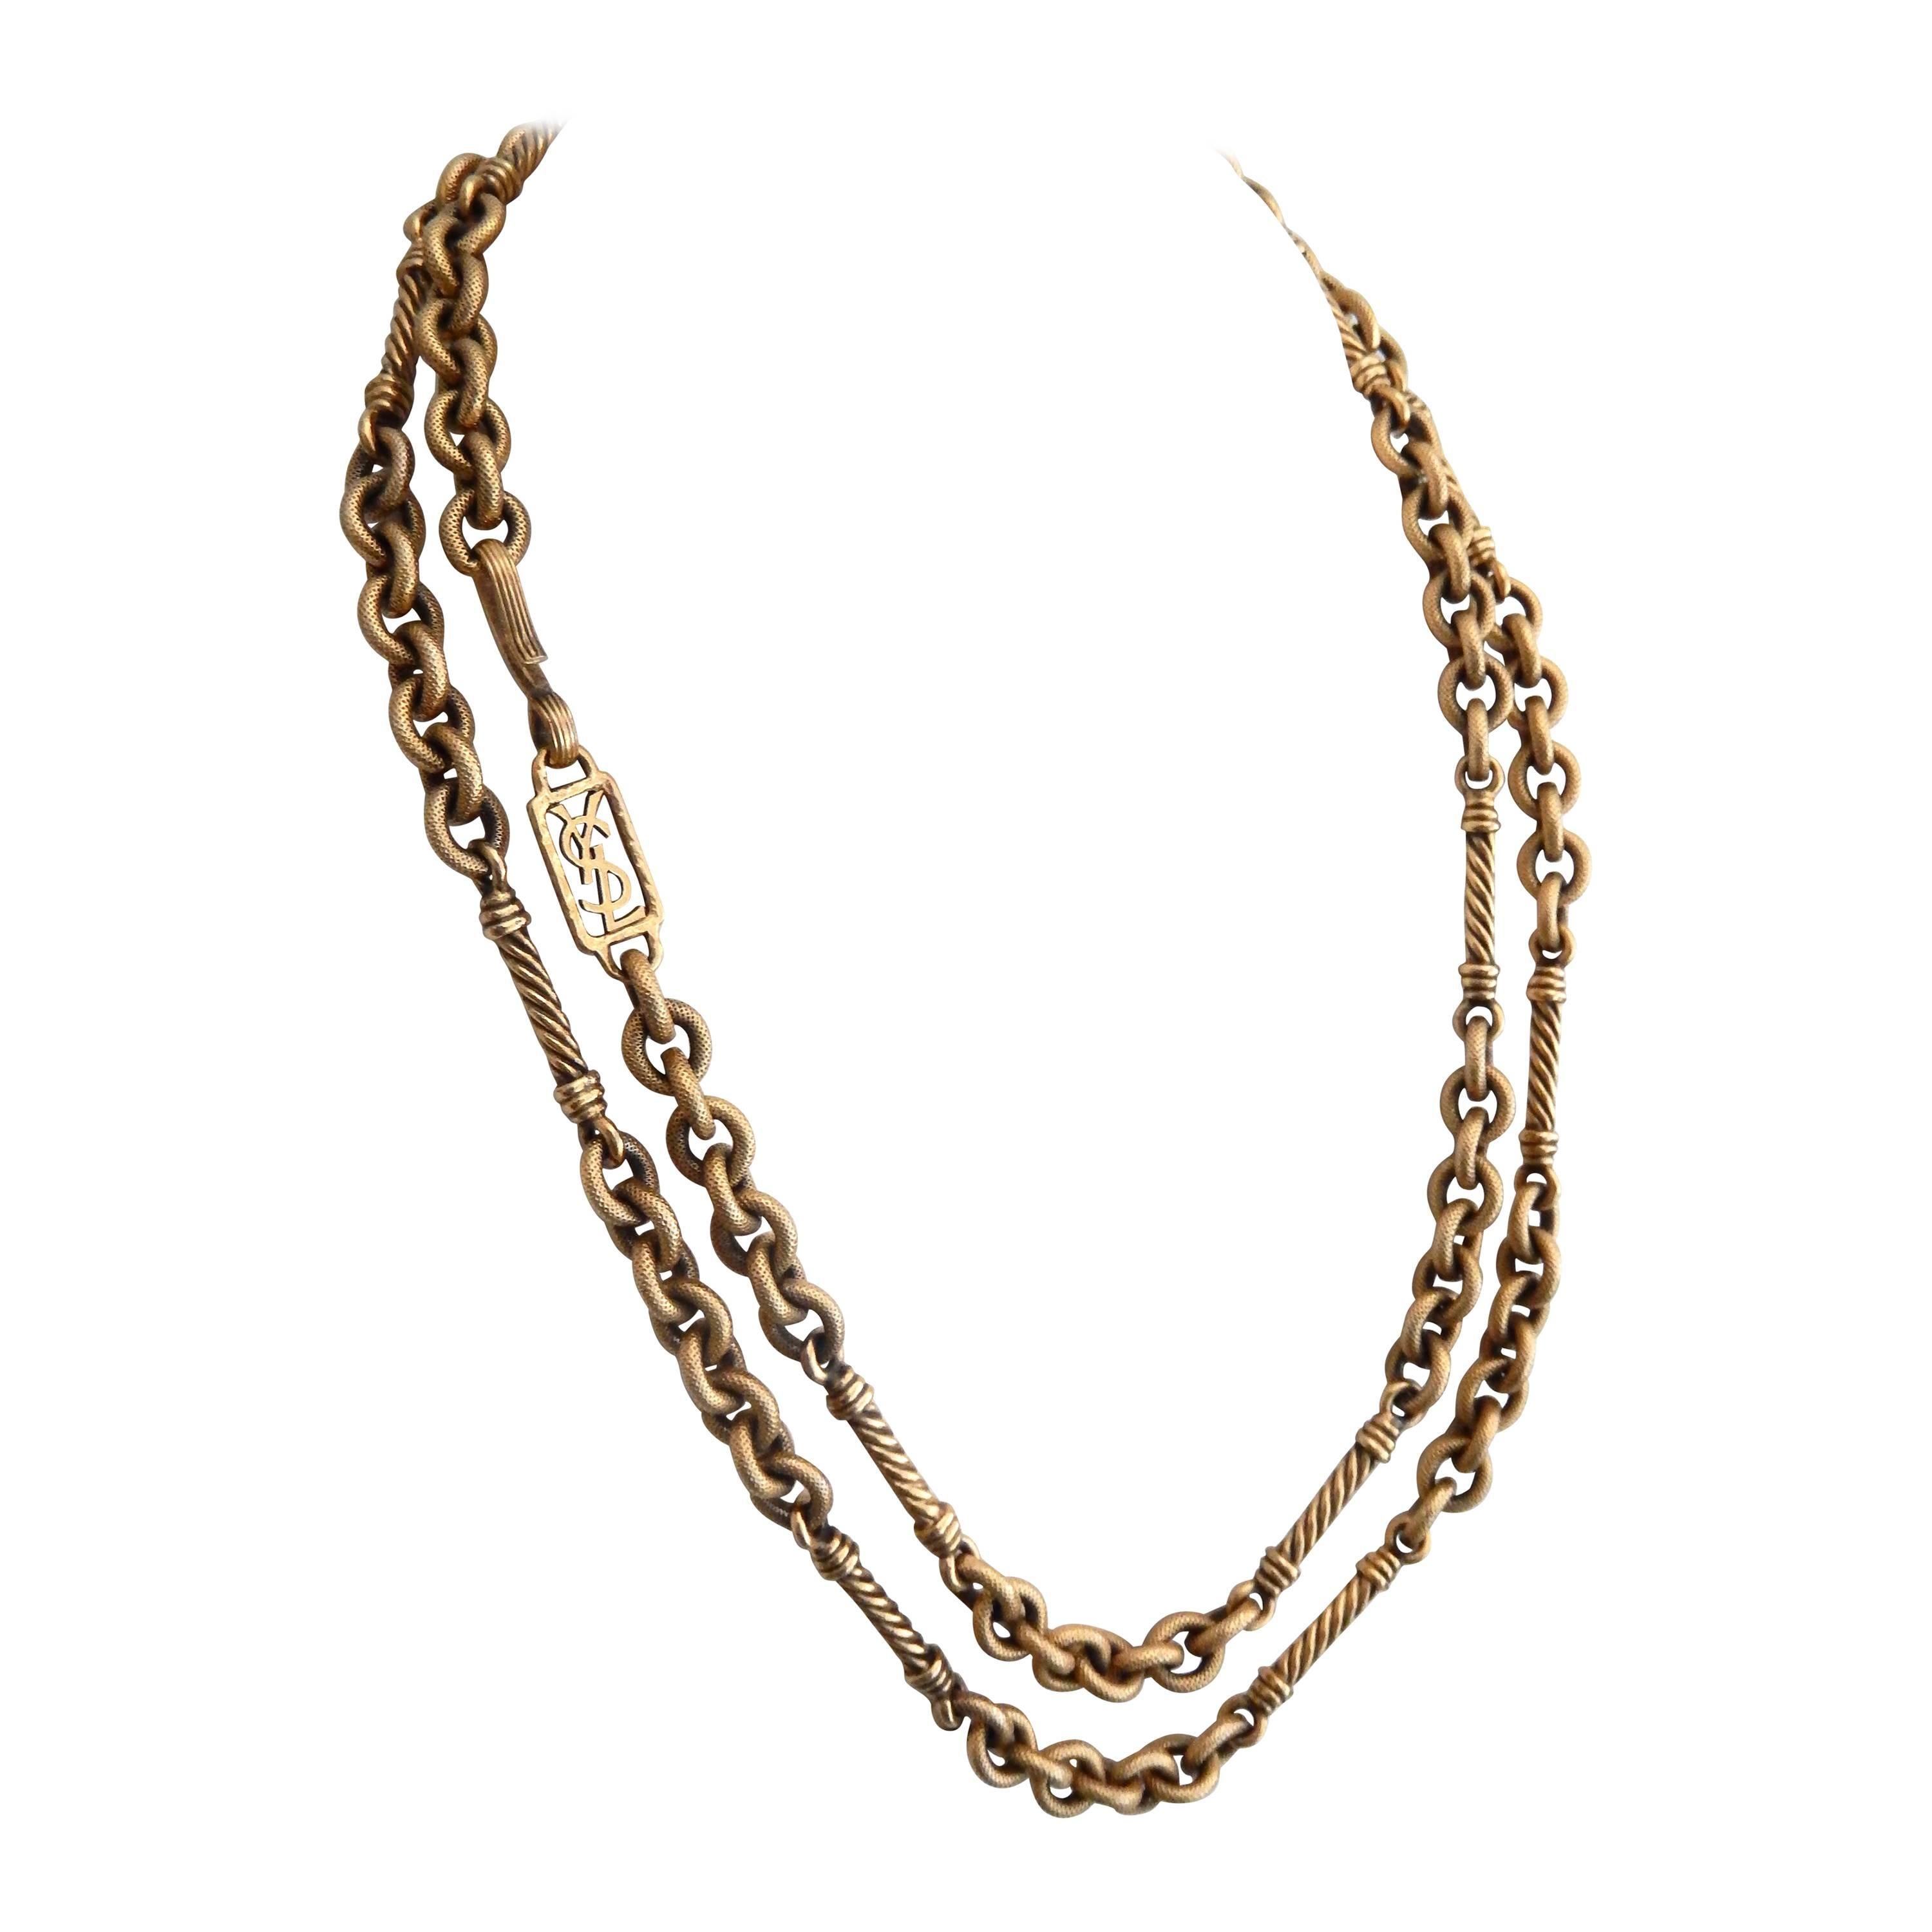 A sophisticated, modern sautoir by Yves Saint Laurent that combines spiral and round links of textured, gilt metal.   The hook clasp allows for the necklace to be doubled. Integrated signature tag.

An icon of French couture, Yves Saint Laurent